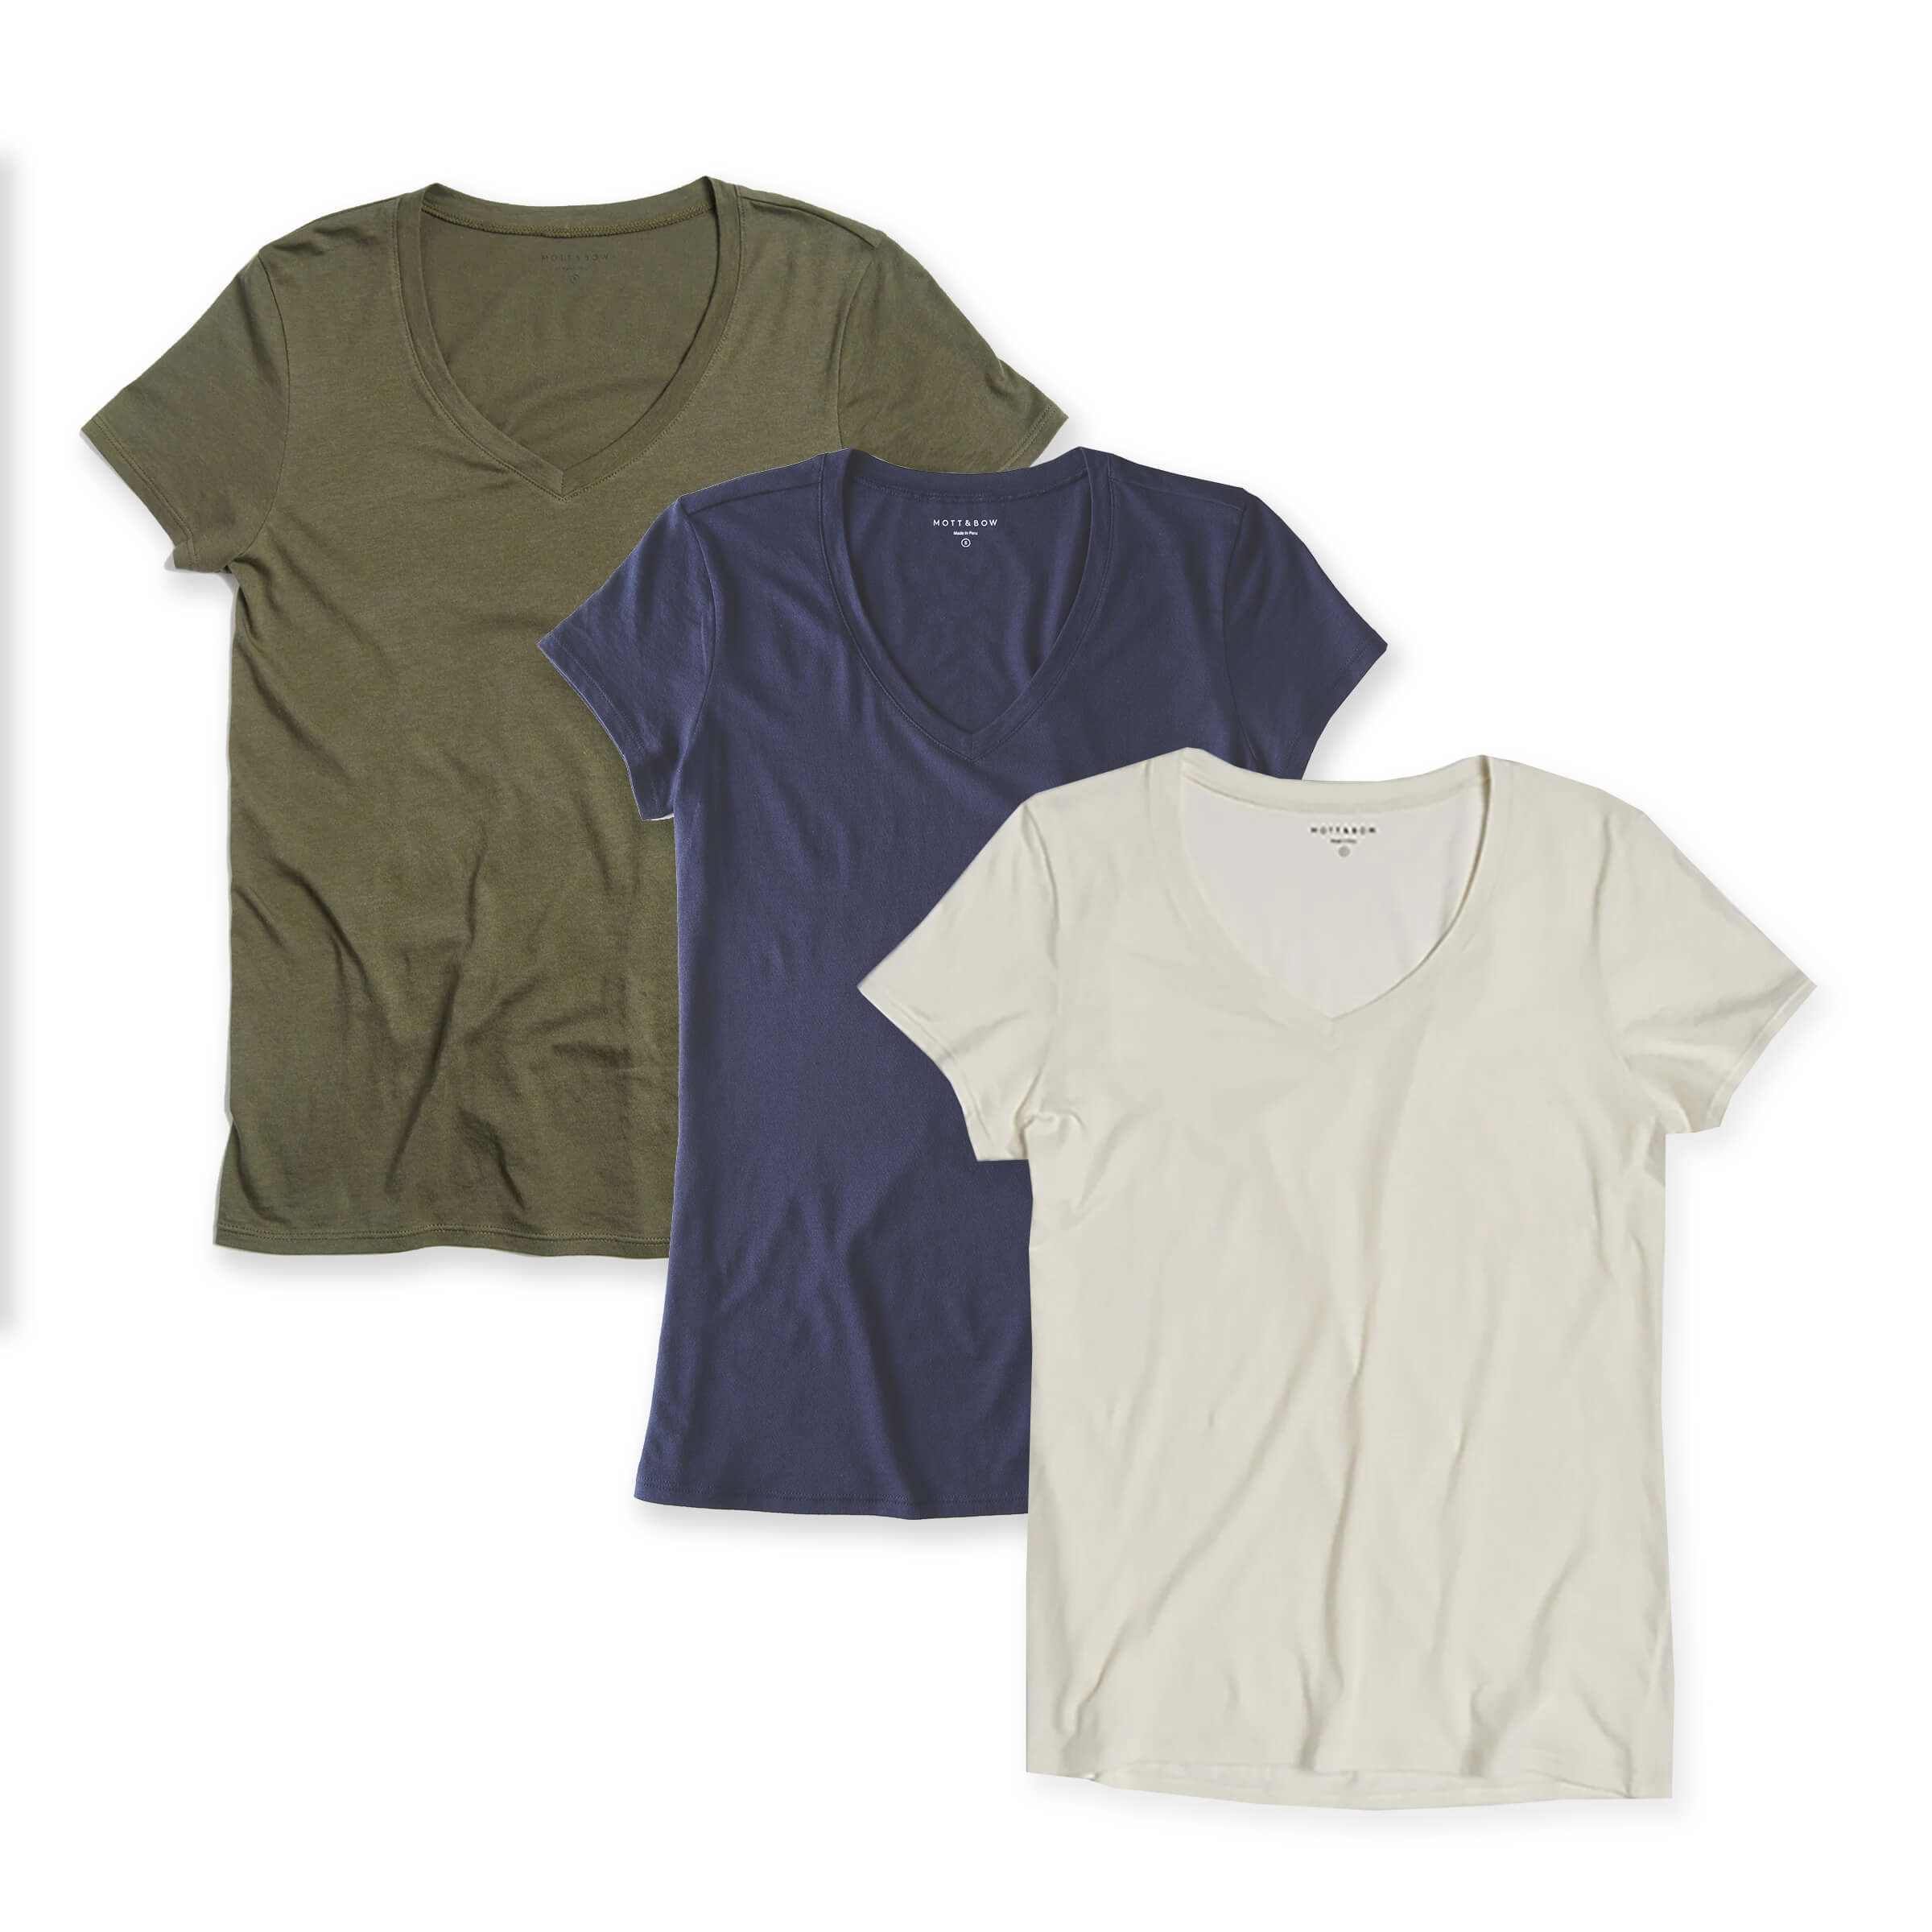 Women wearing Military Green/Navy/Vintage White Fitted V-Neck Marcy 3-Pack tees